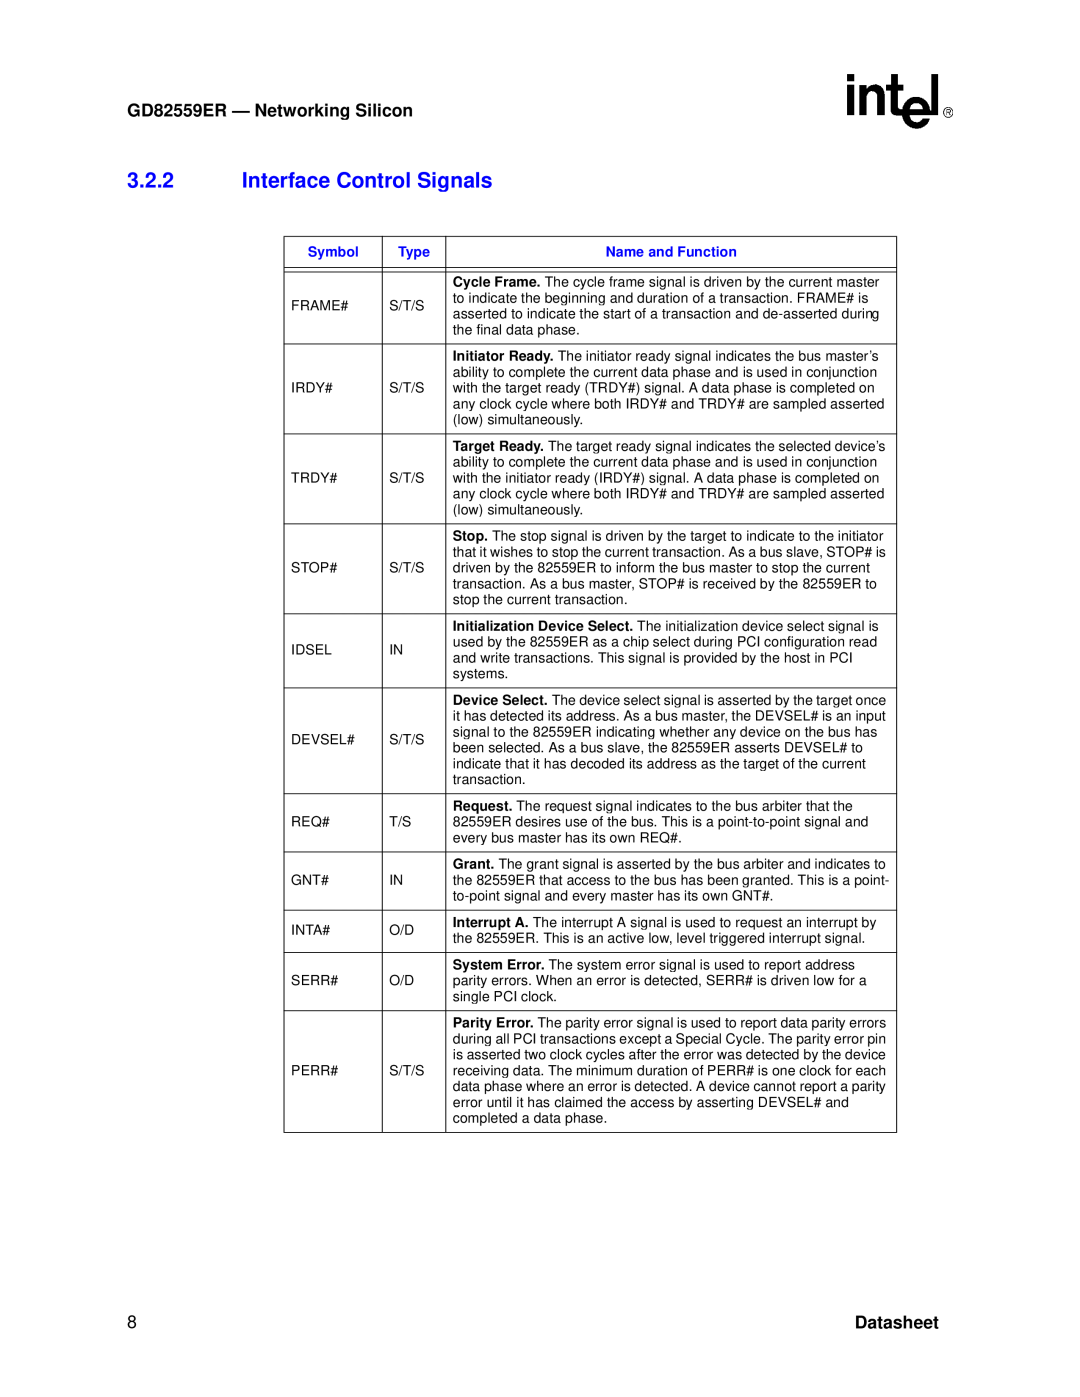 Intel manual Interface Control Signals, GD82559ER - Networkin g Silicon, Datasheet 